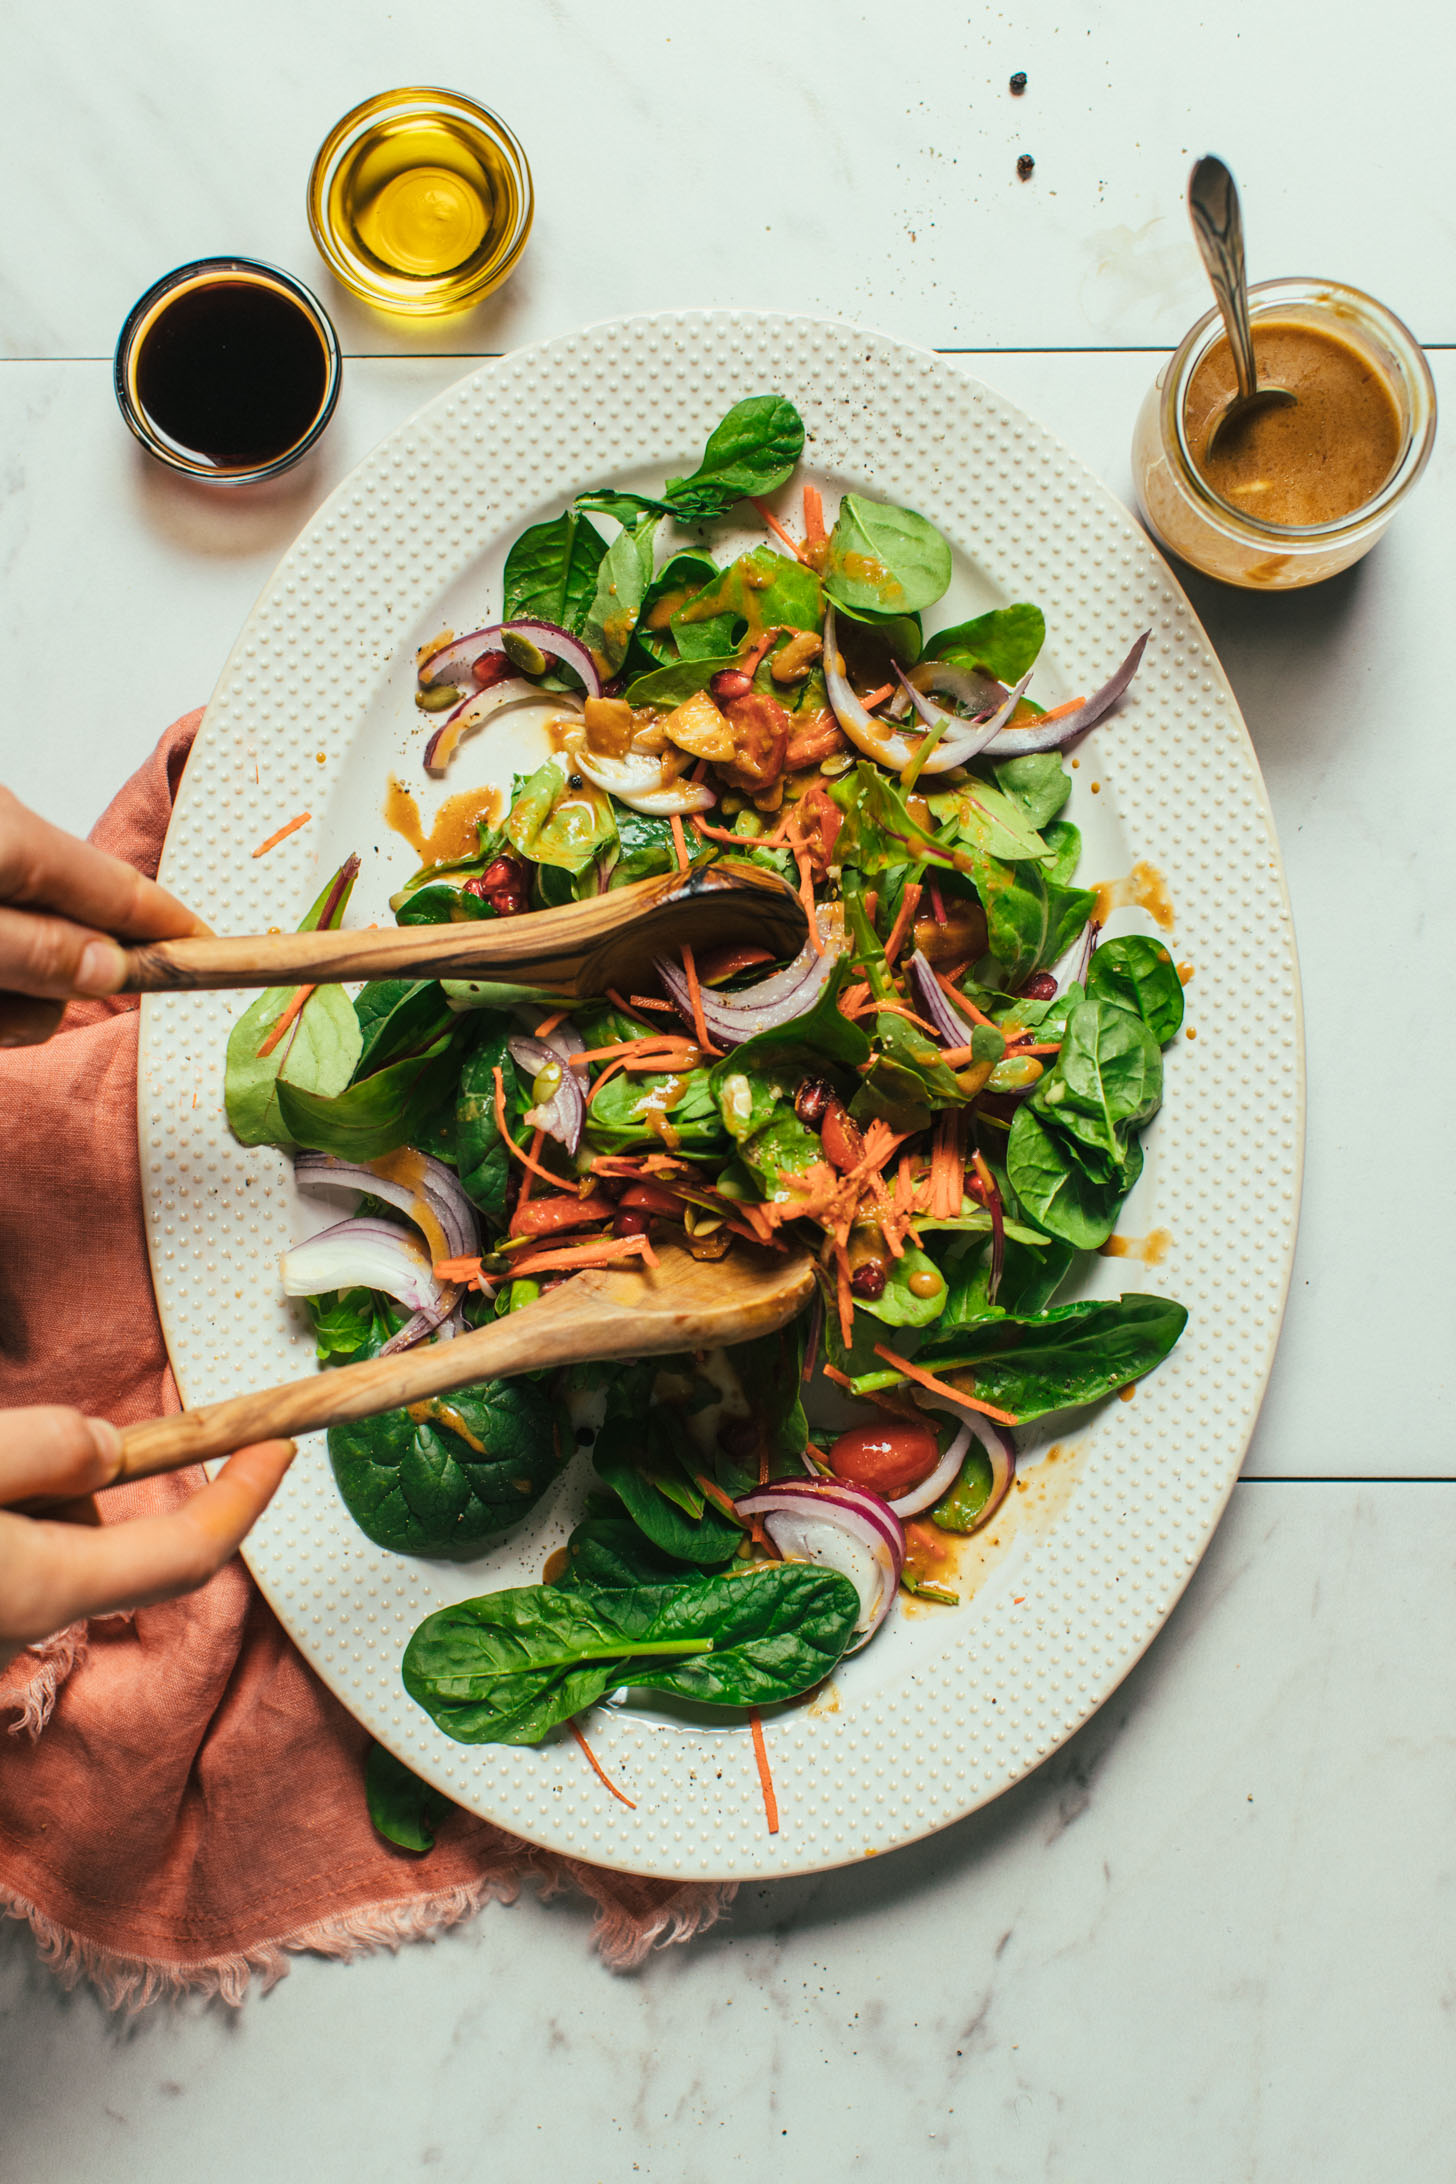 Using wooden salad spoons to toss a salad with homemade Balsamic Vinaigrette Dressing